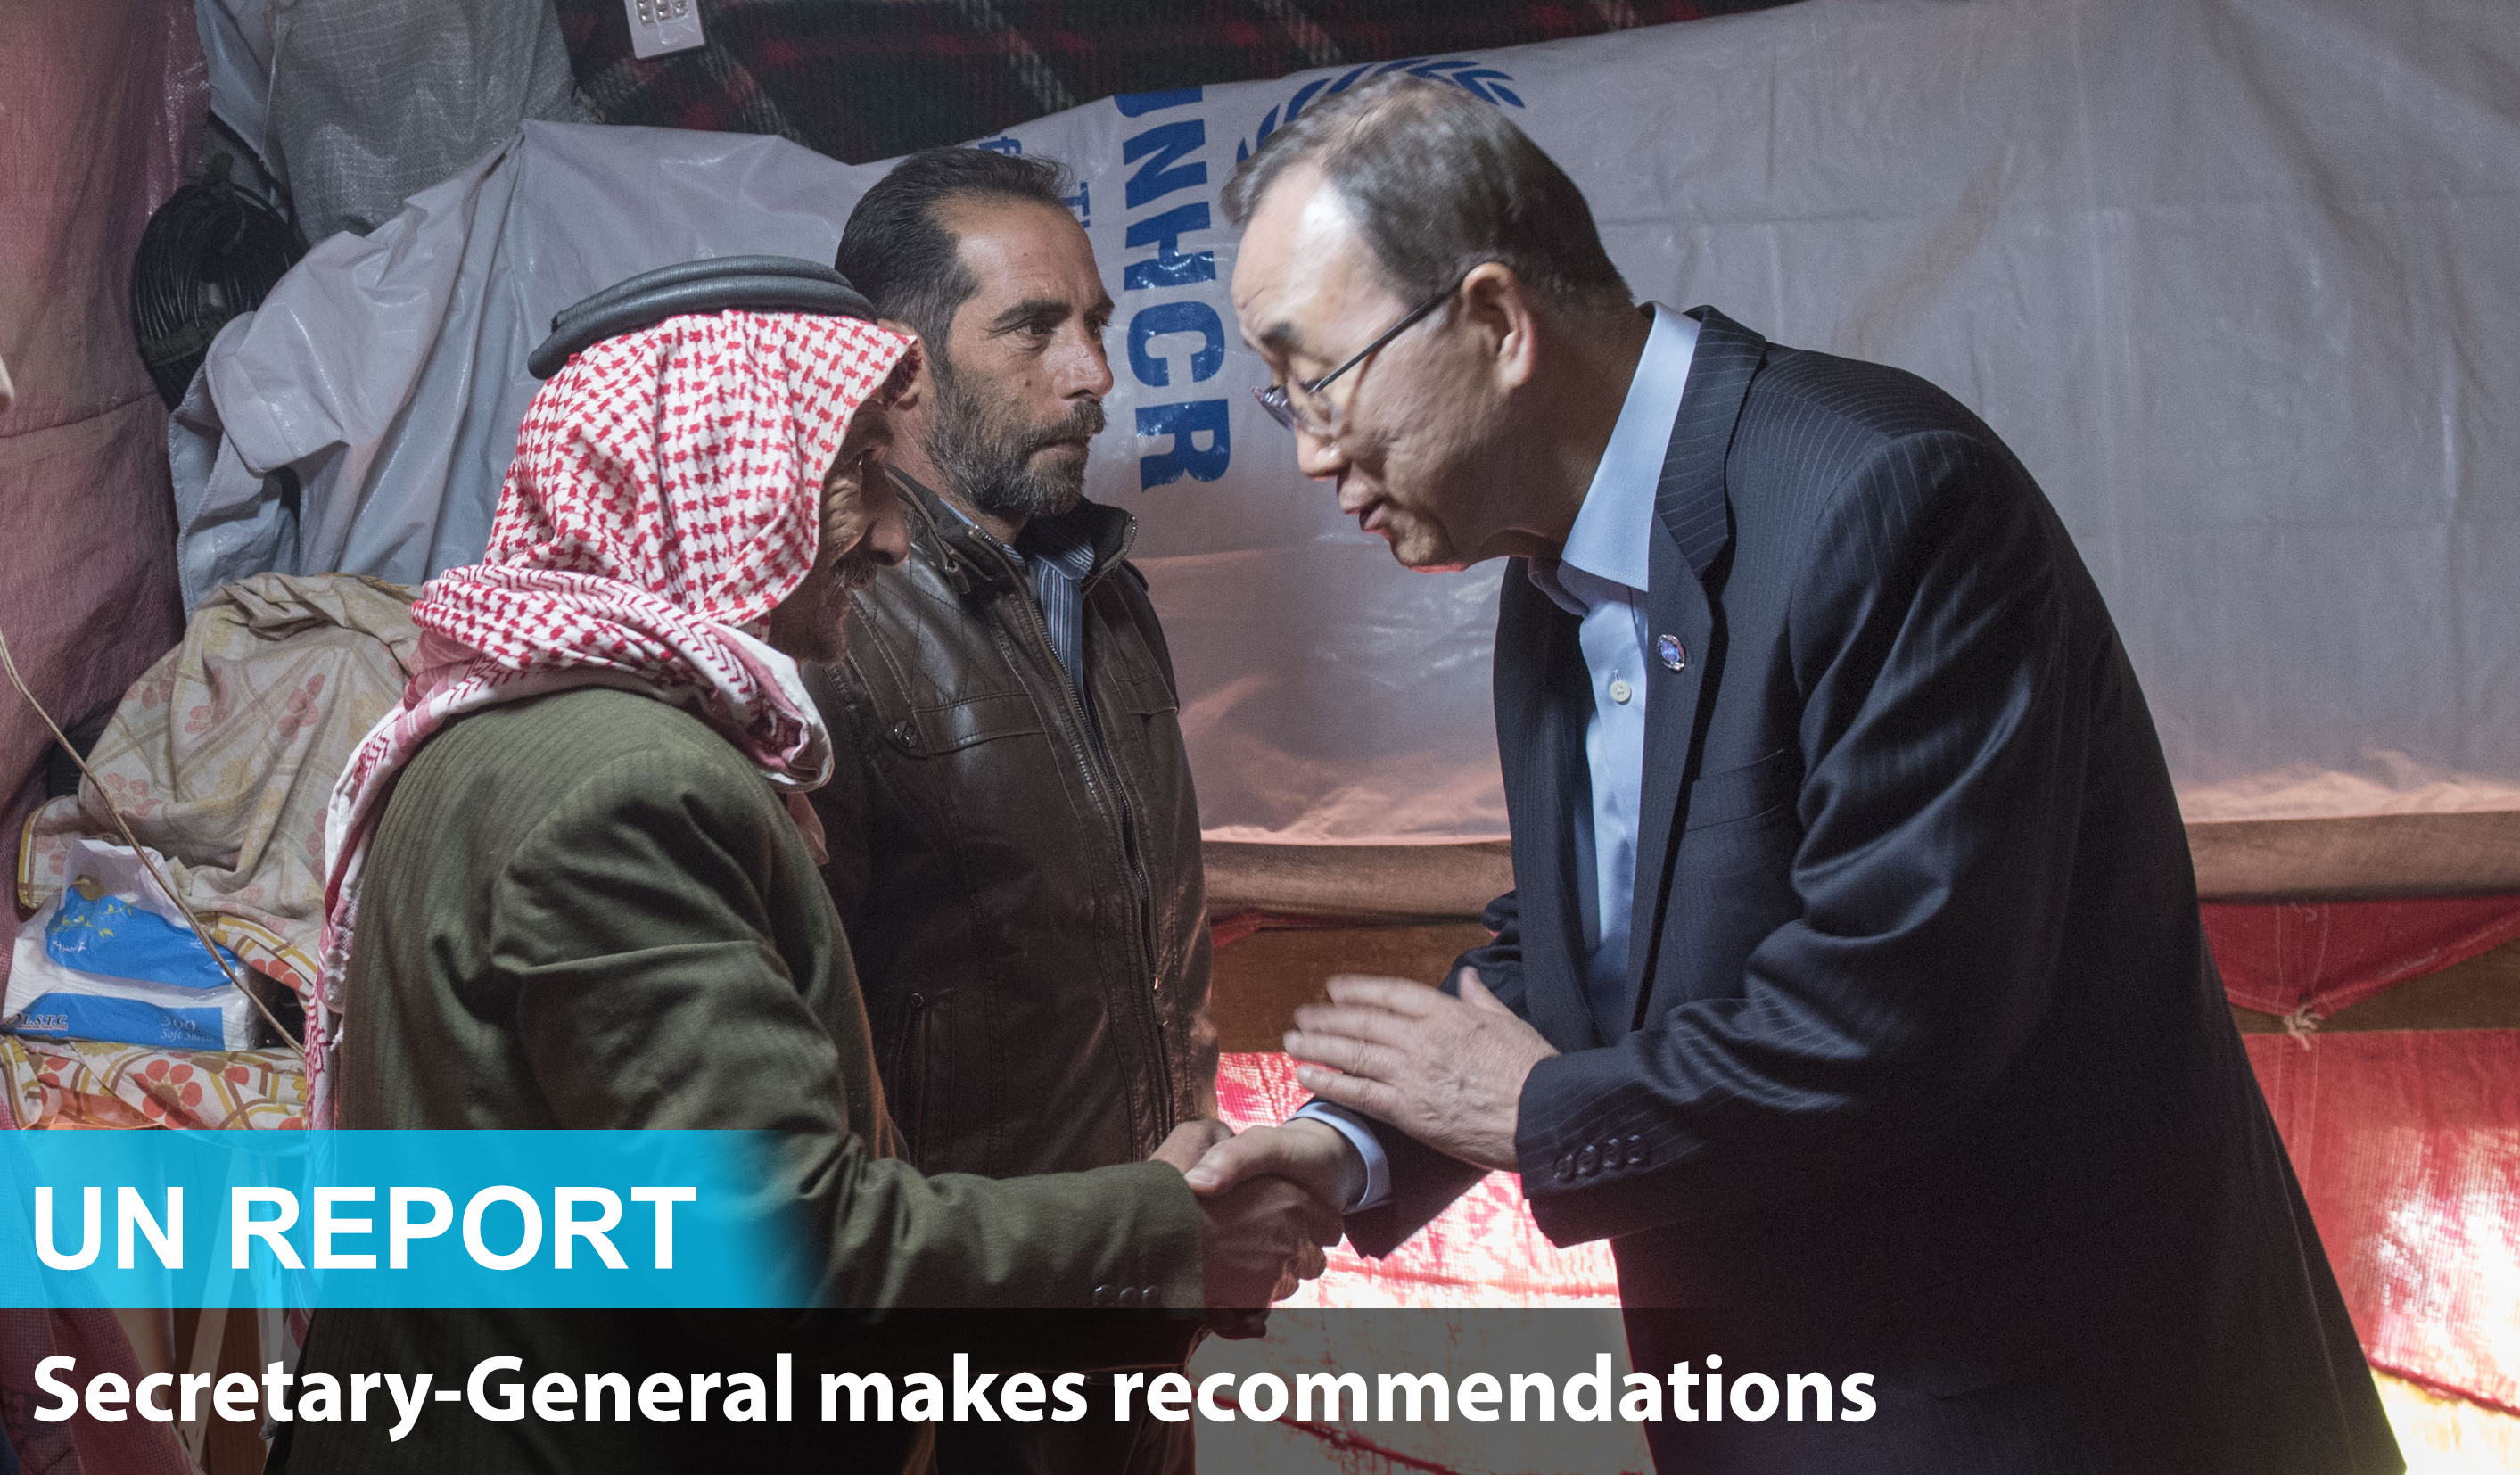 UN Secretary-General Report on Large movements of refugees and migrants